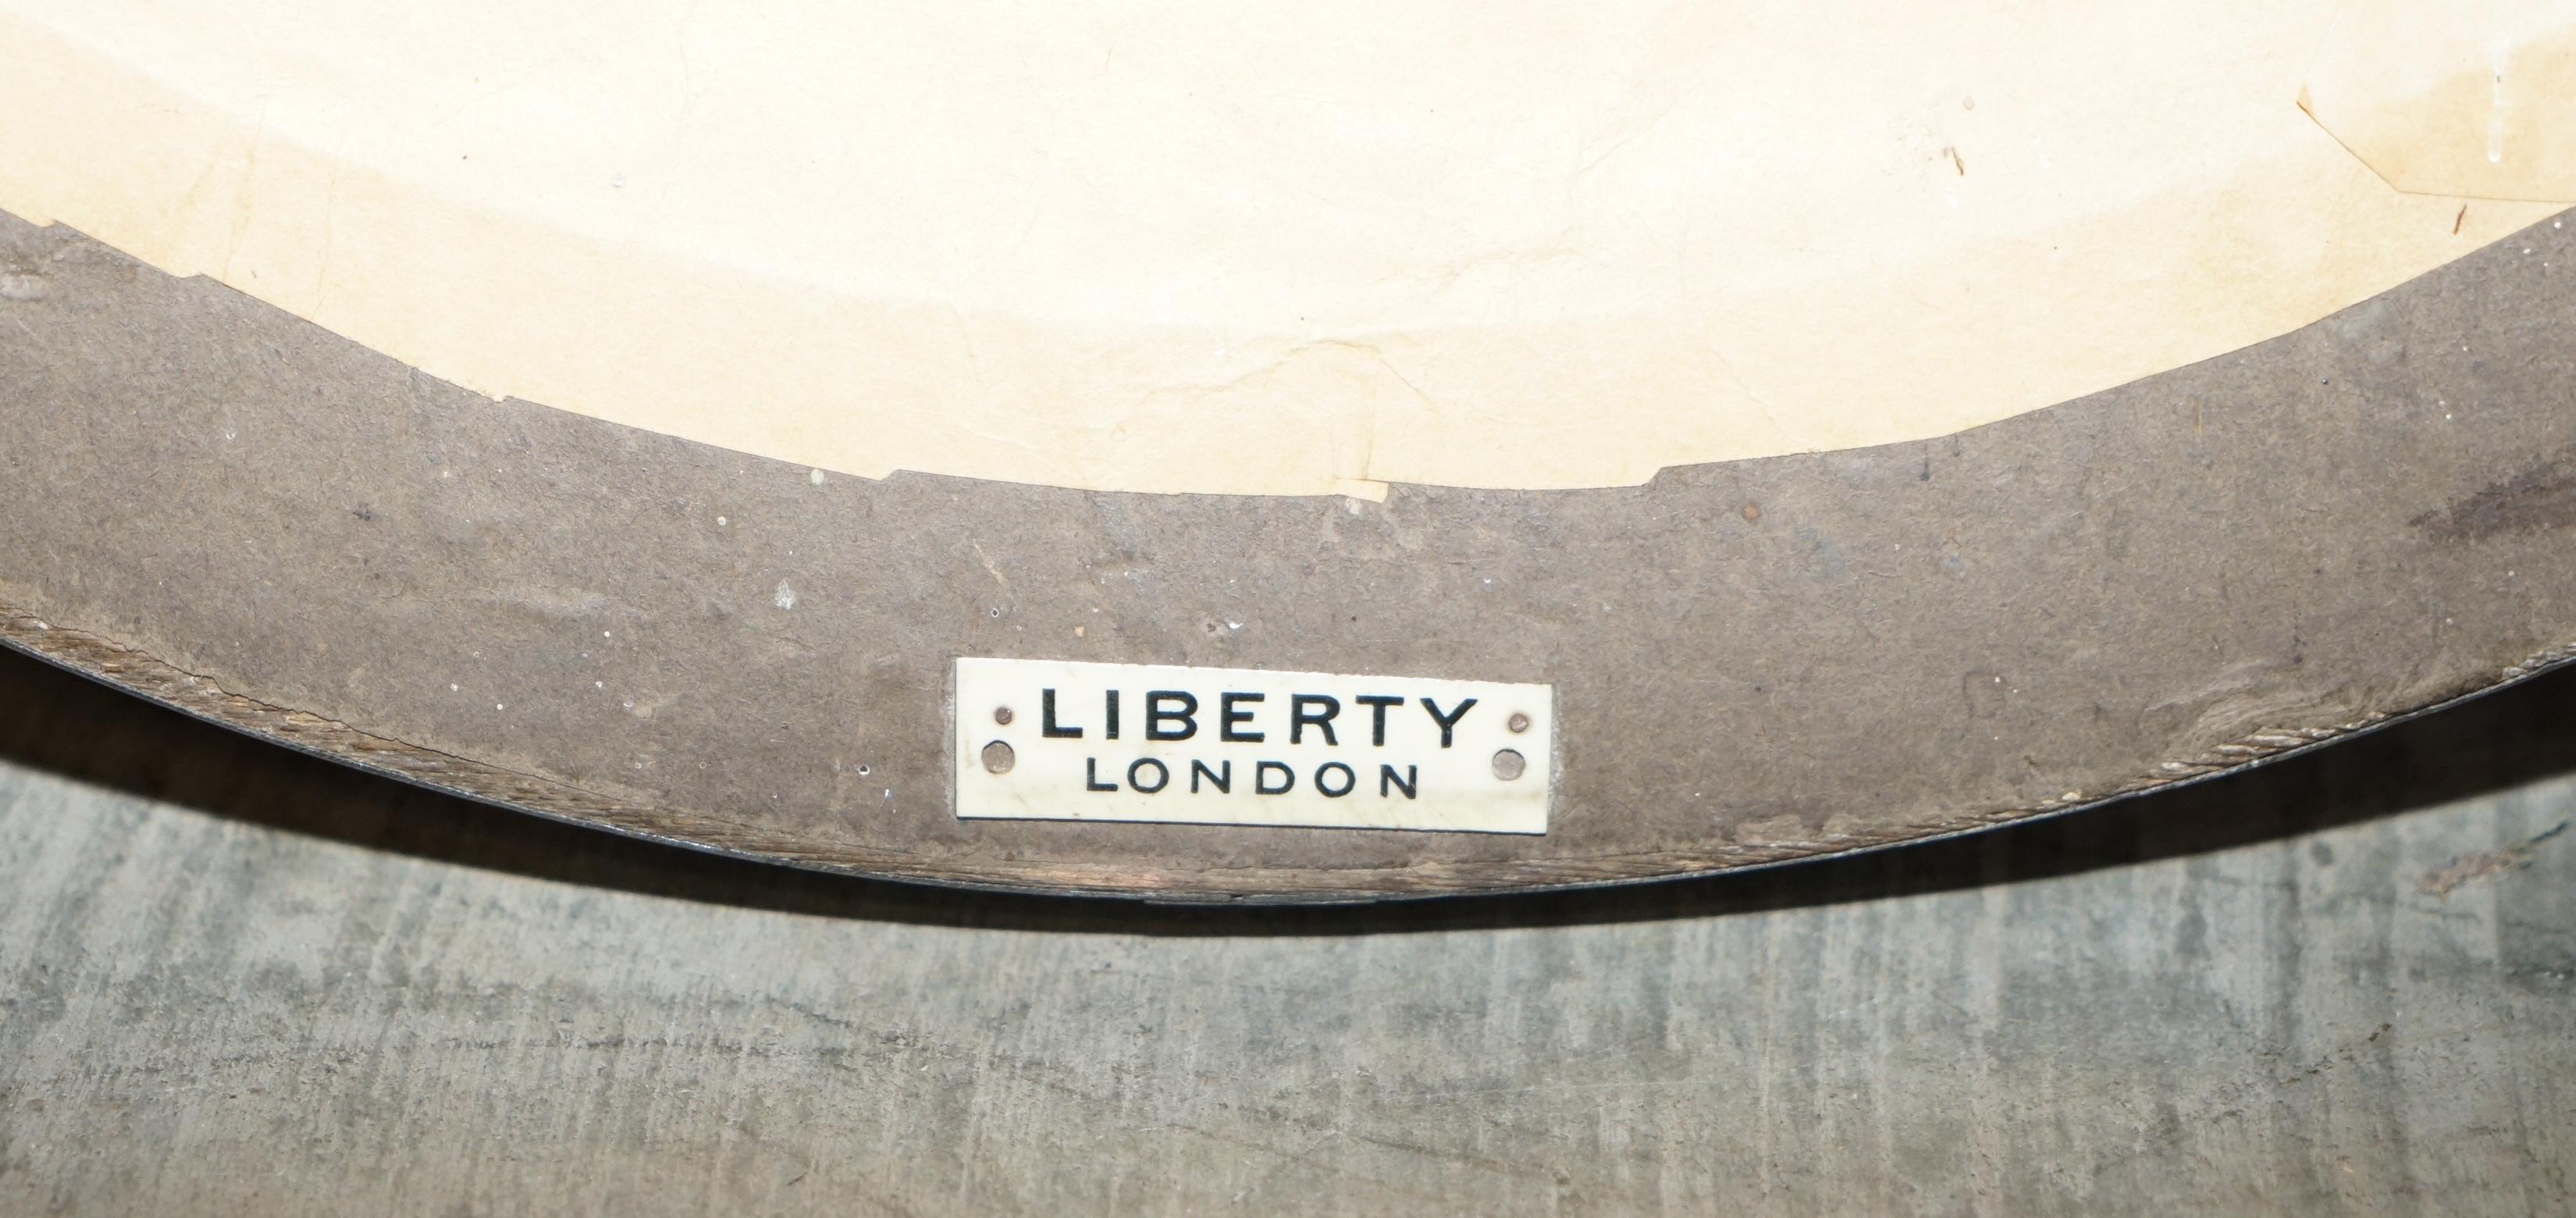 We are delighted to offer this stunning Liberty’s London hand hammered pewter round wall mirror with thick glass plate and original Liberty’s London plaque to the rear

This mirror is truly sublime, the hand hammered pewter frame is an absolute